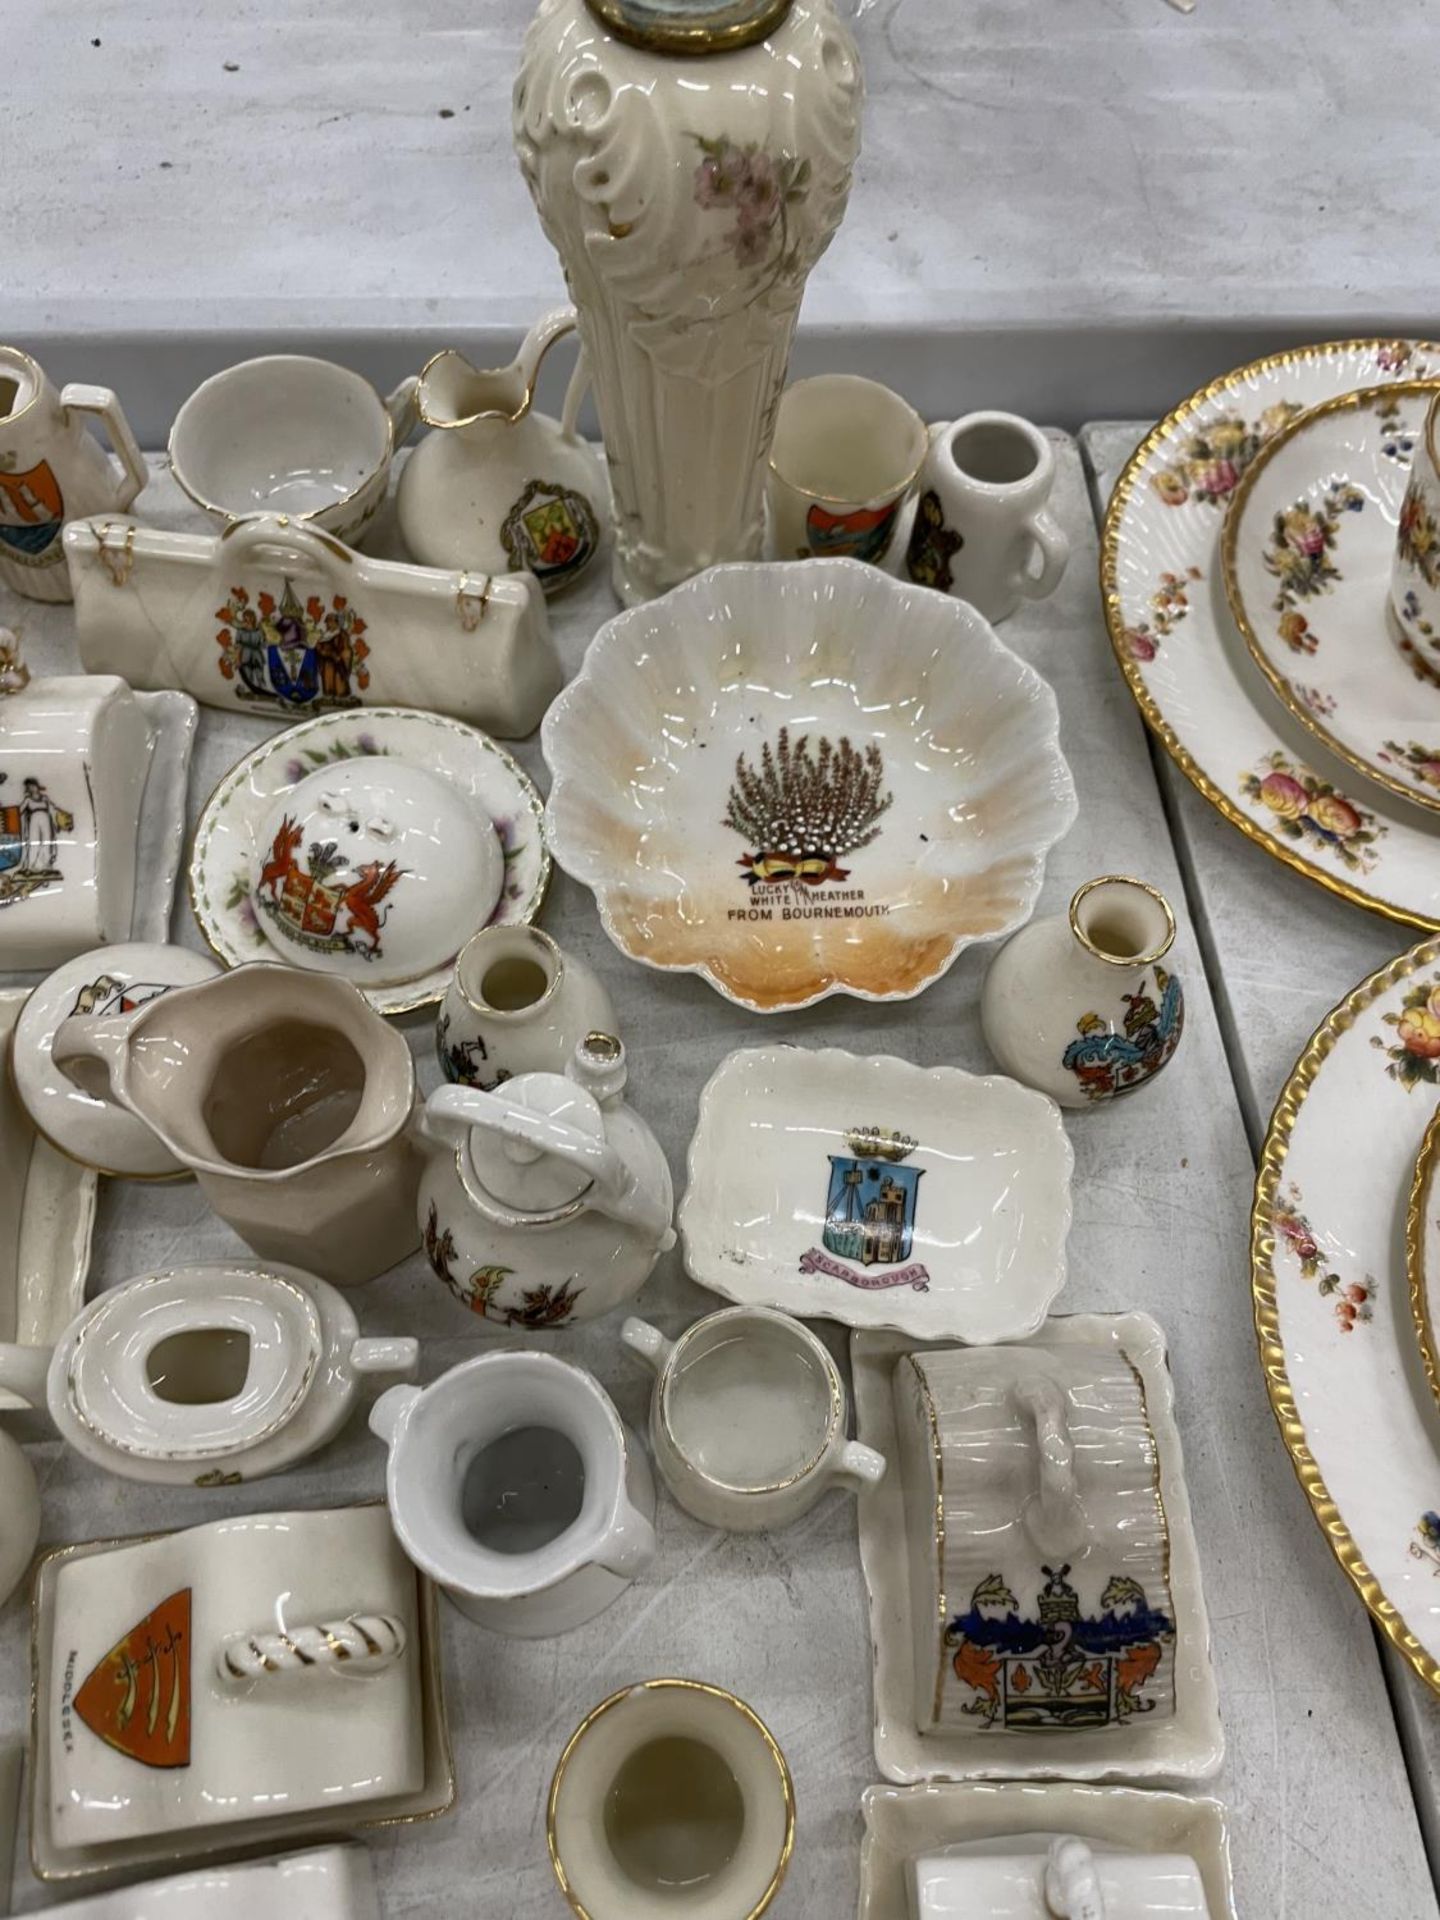 A LARGE QUANTITY OF CRESTED WARE TO INCLUDE MINIATURE CHEESE DISHES, PLATES, VASES, CUPS, JUGS, ETC - Image 11 of 11